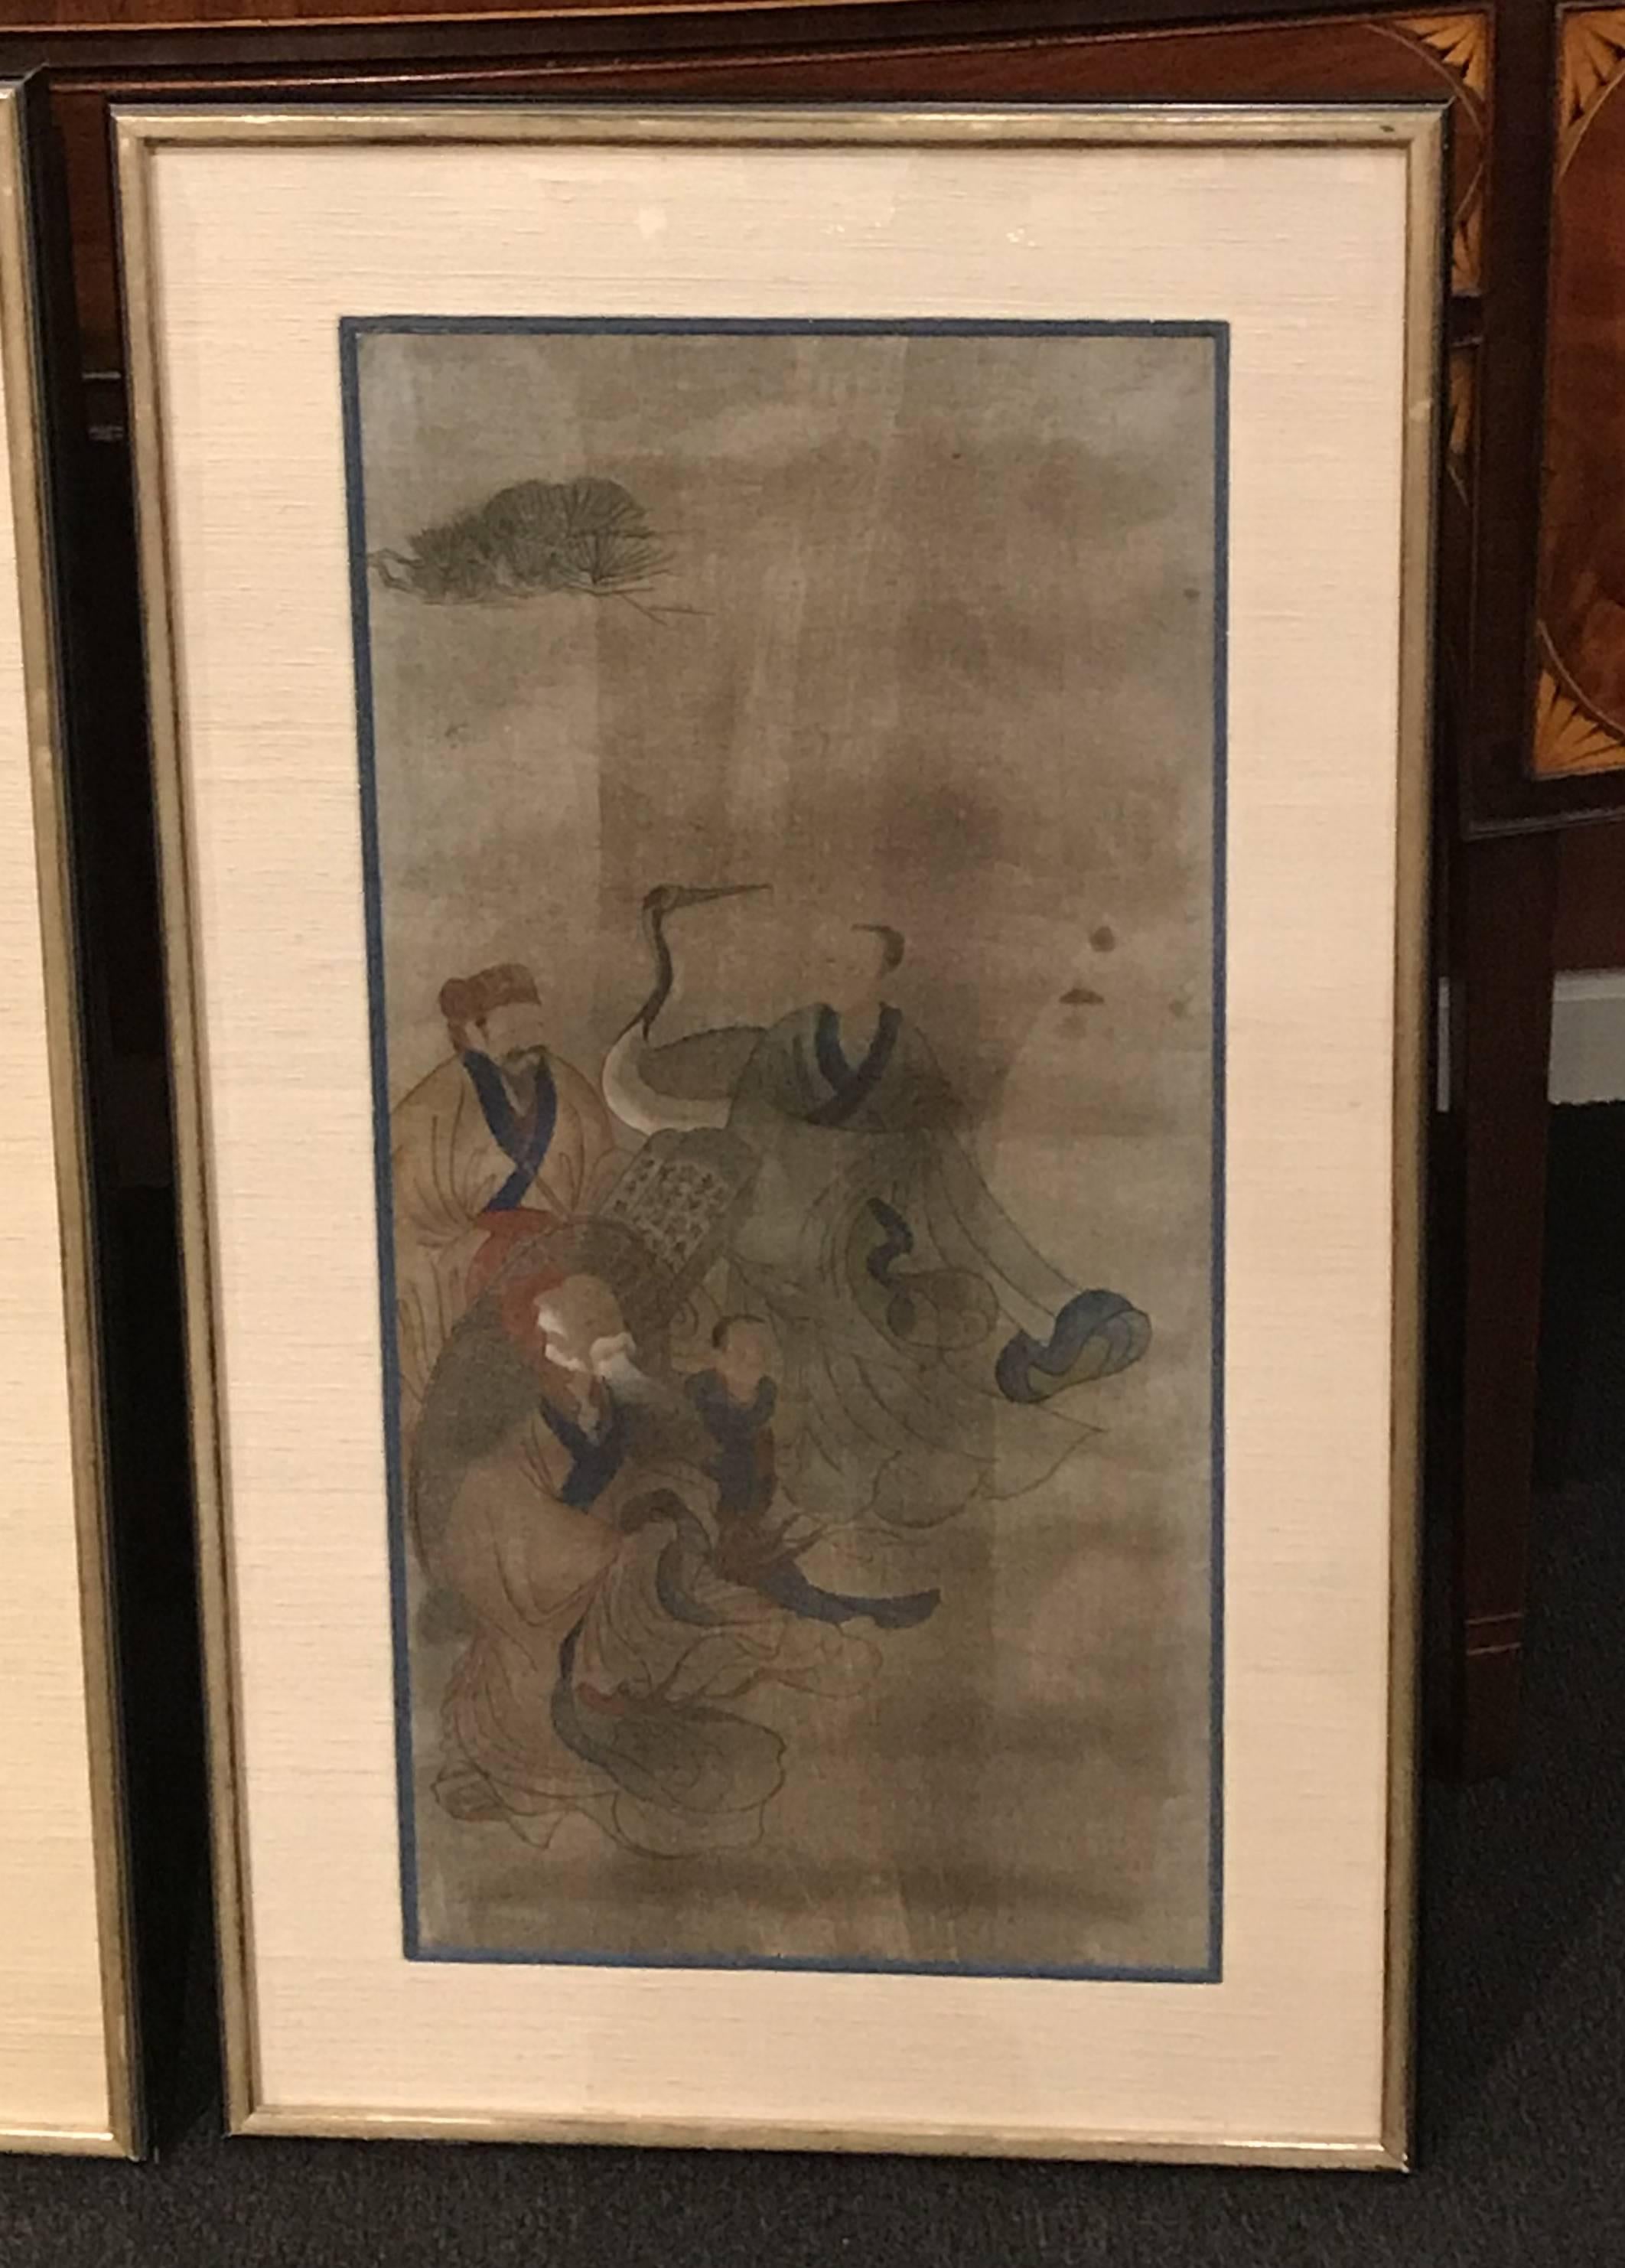 what dynasty is the above silk painting from